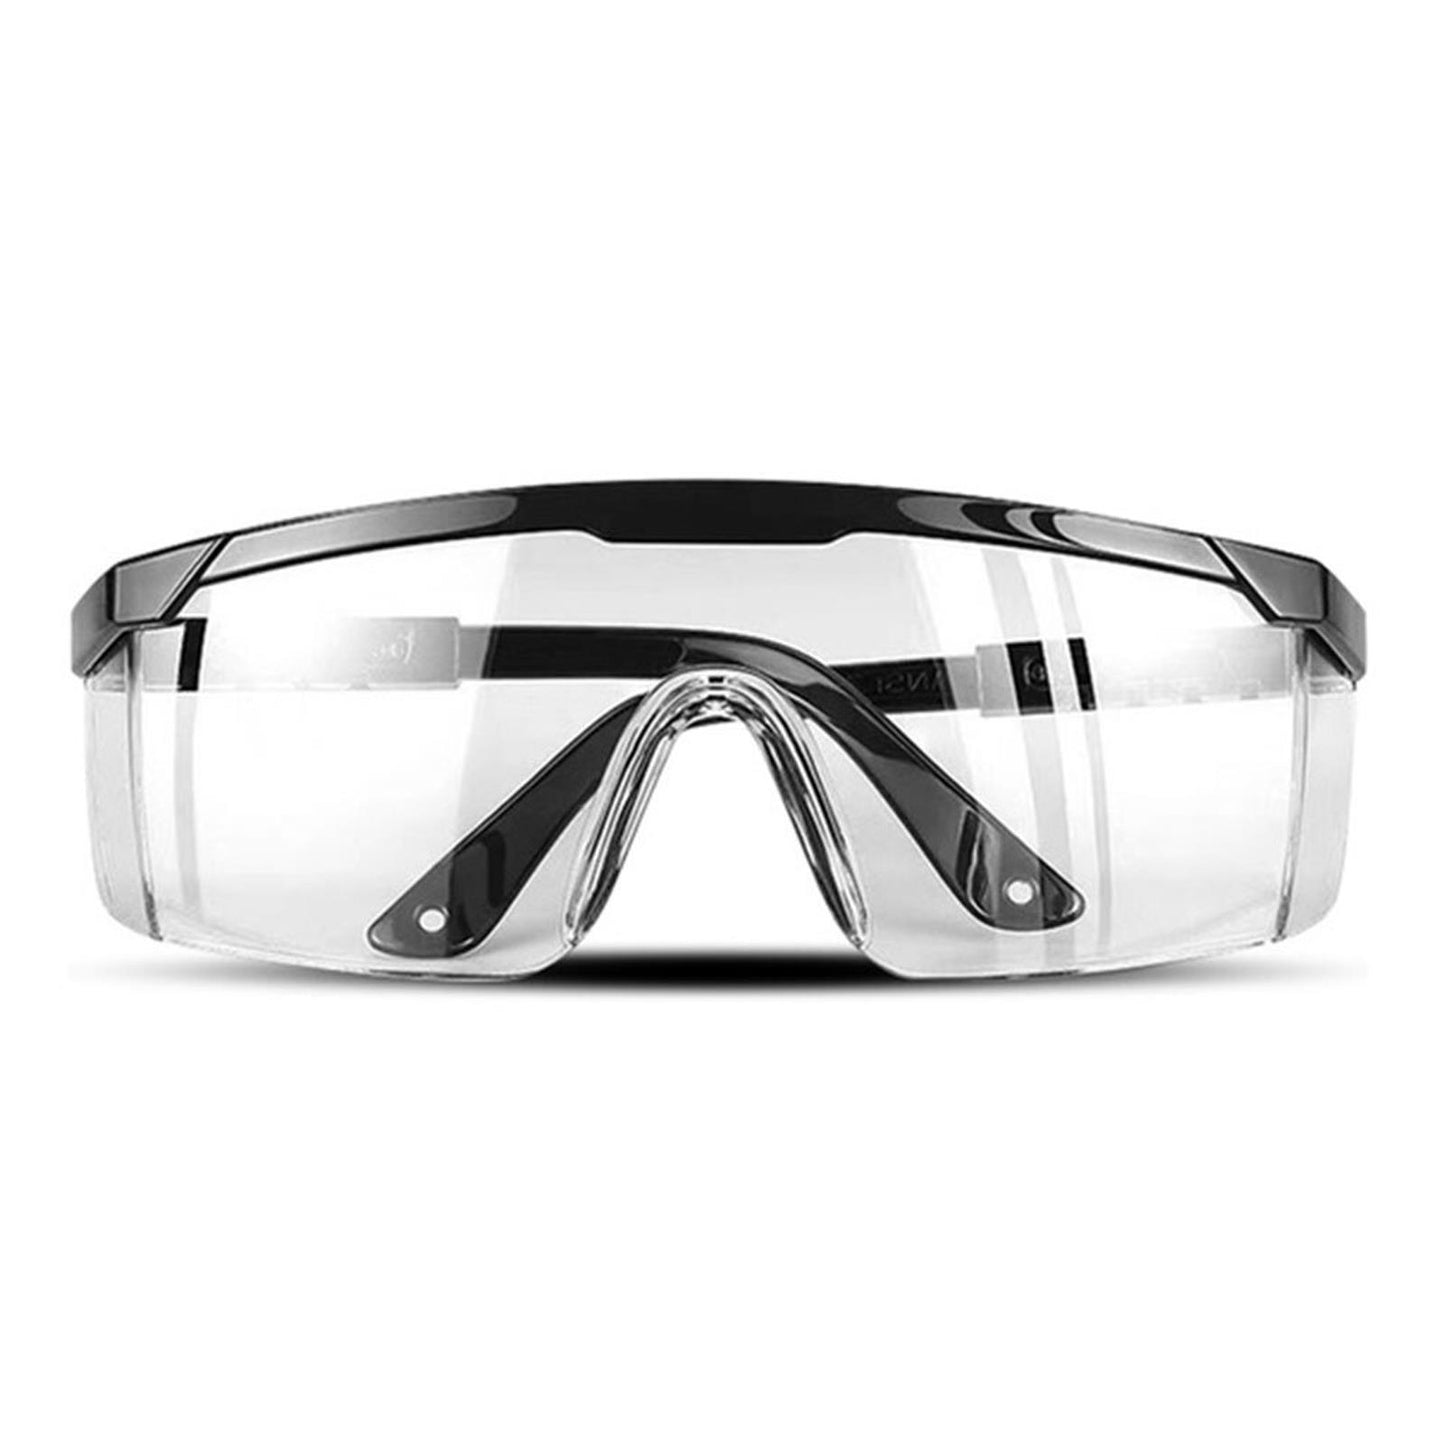 Keep Your Eyes Protected with Eye Safety Glass